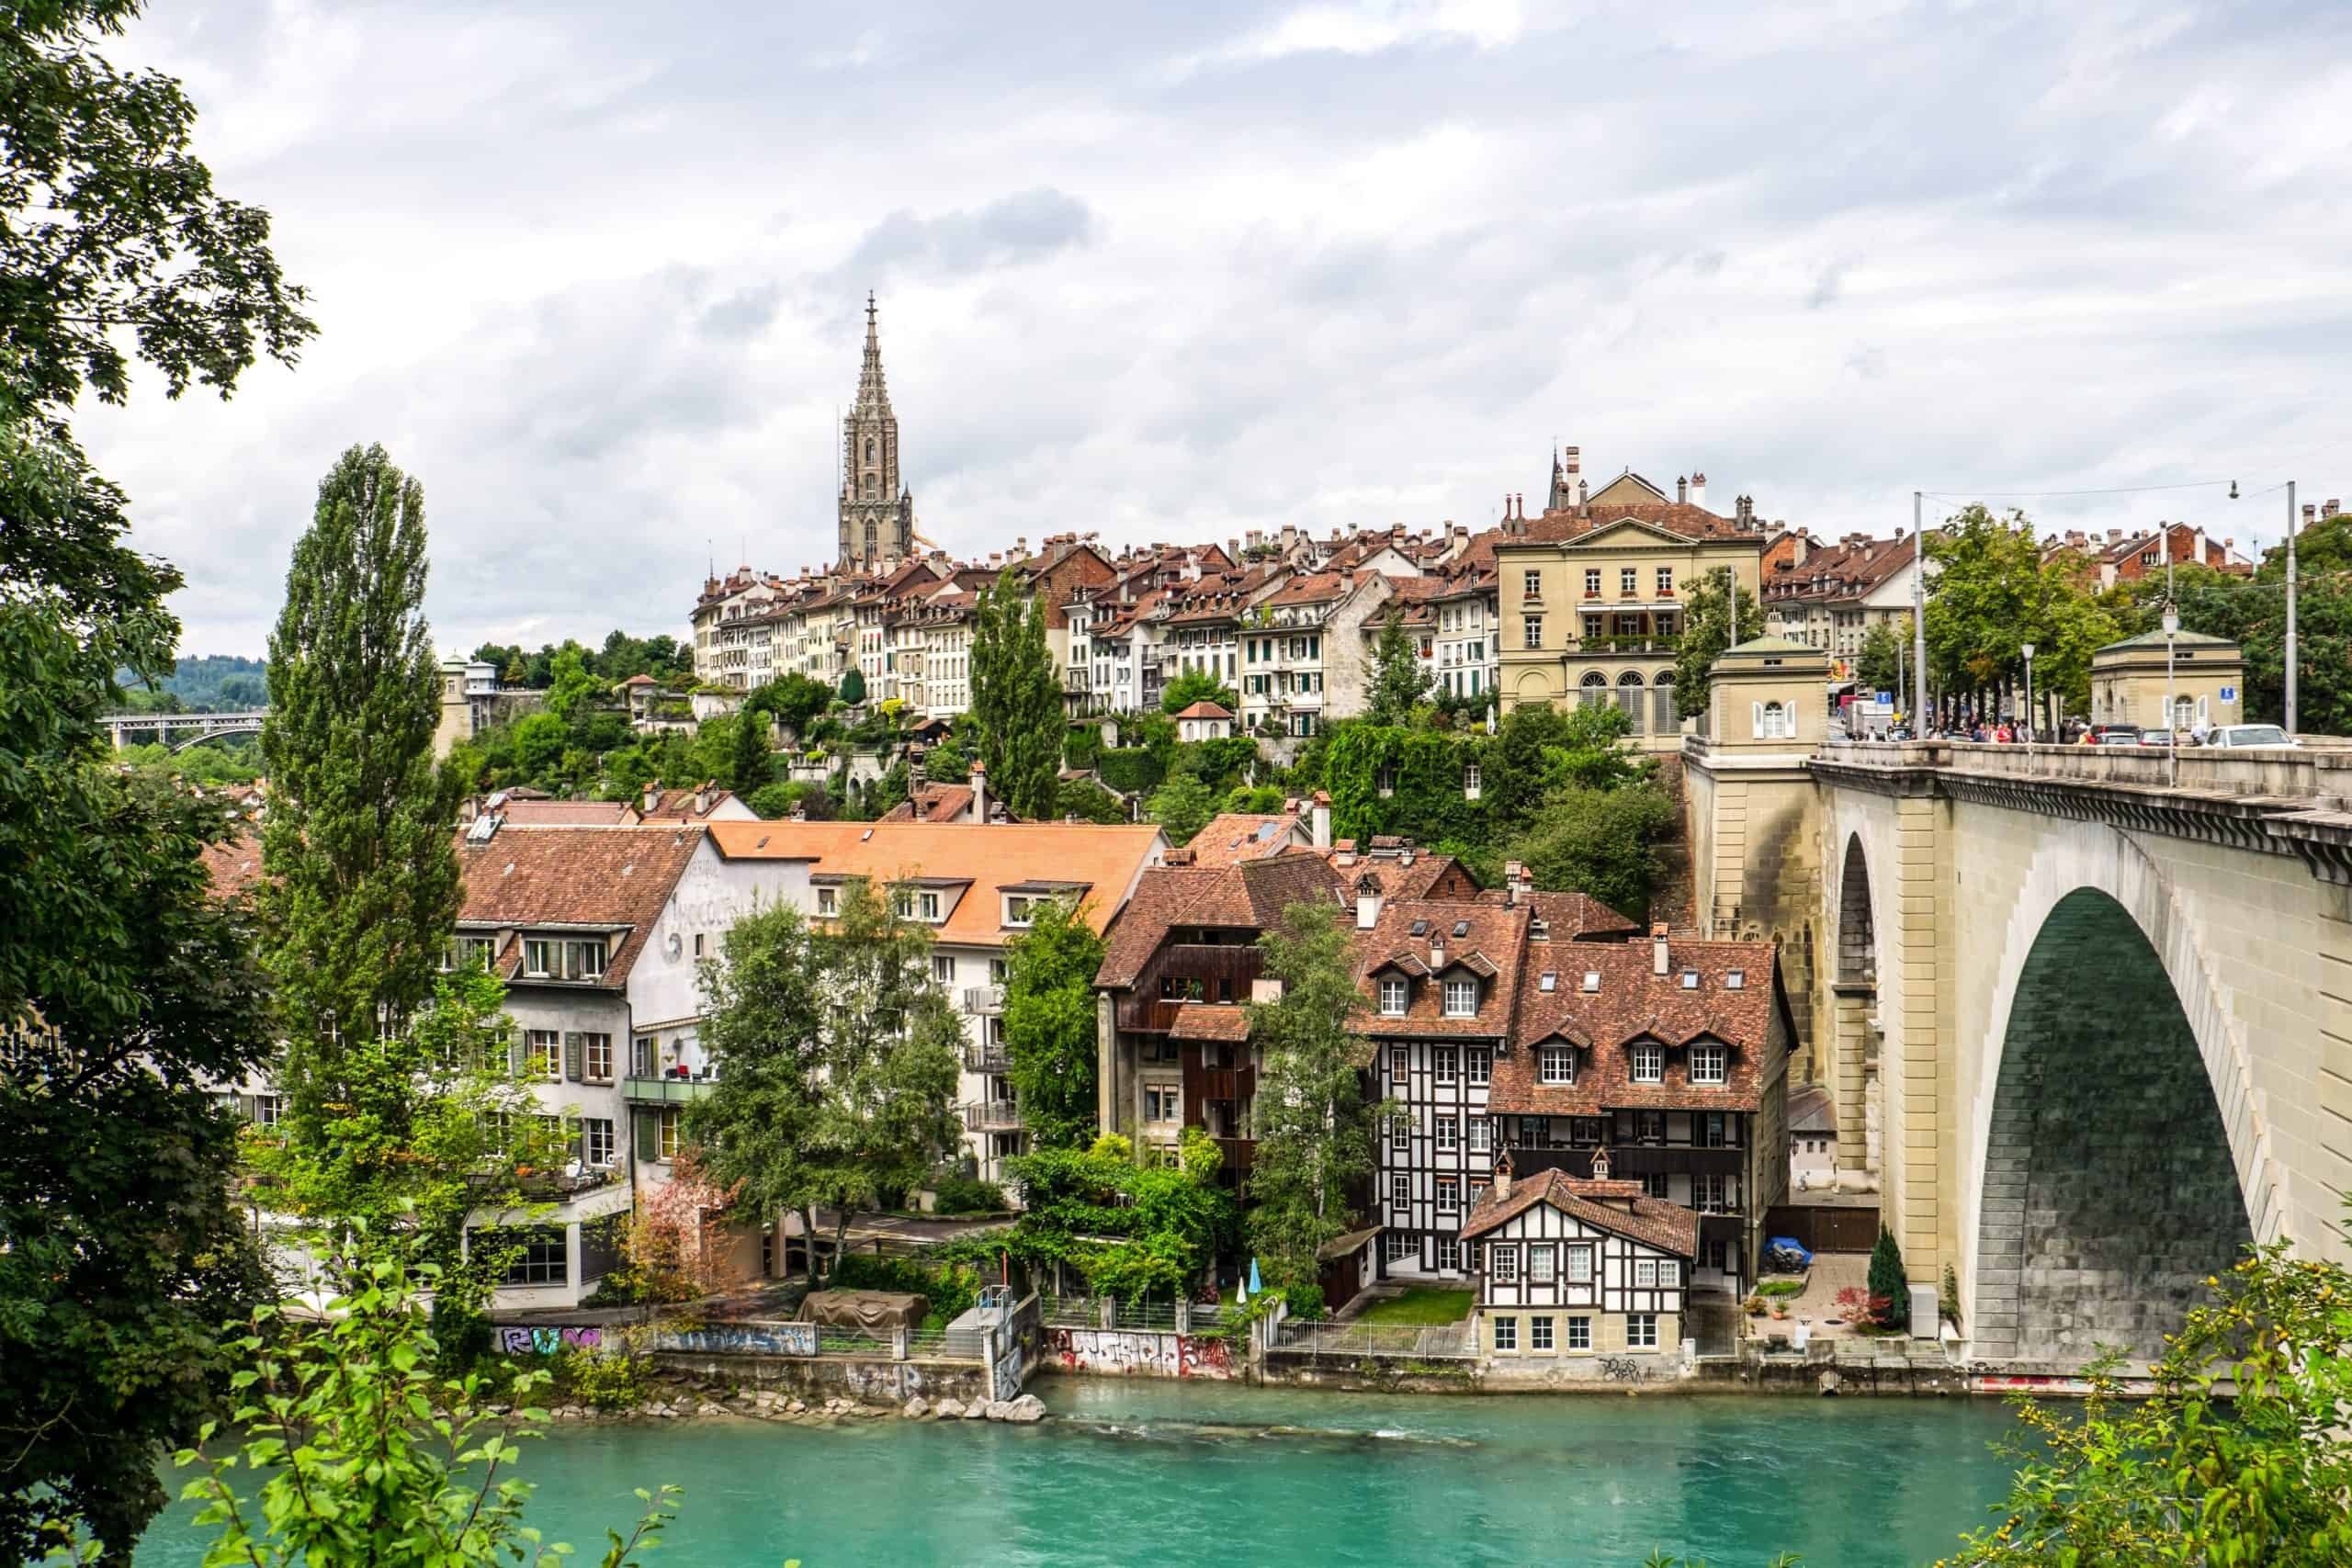 View of the old city of Bern and the red rooftops, Switzerland's Capital, from the bridge